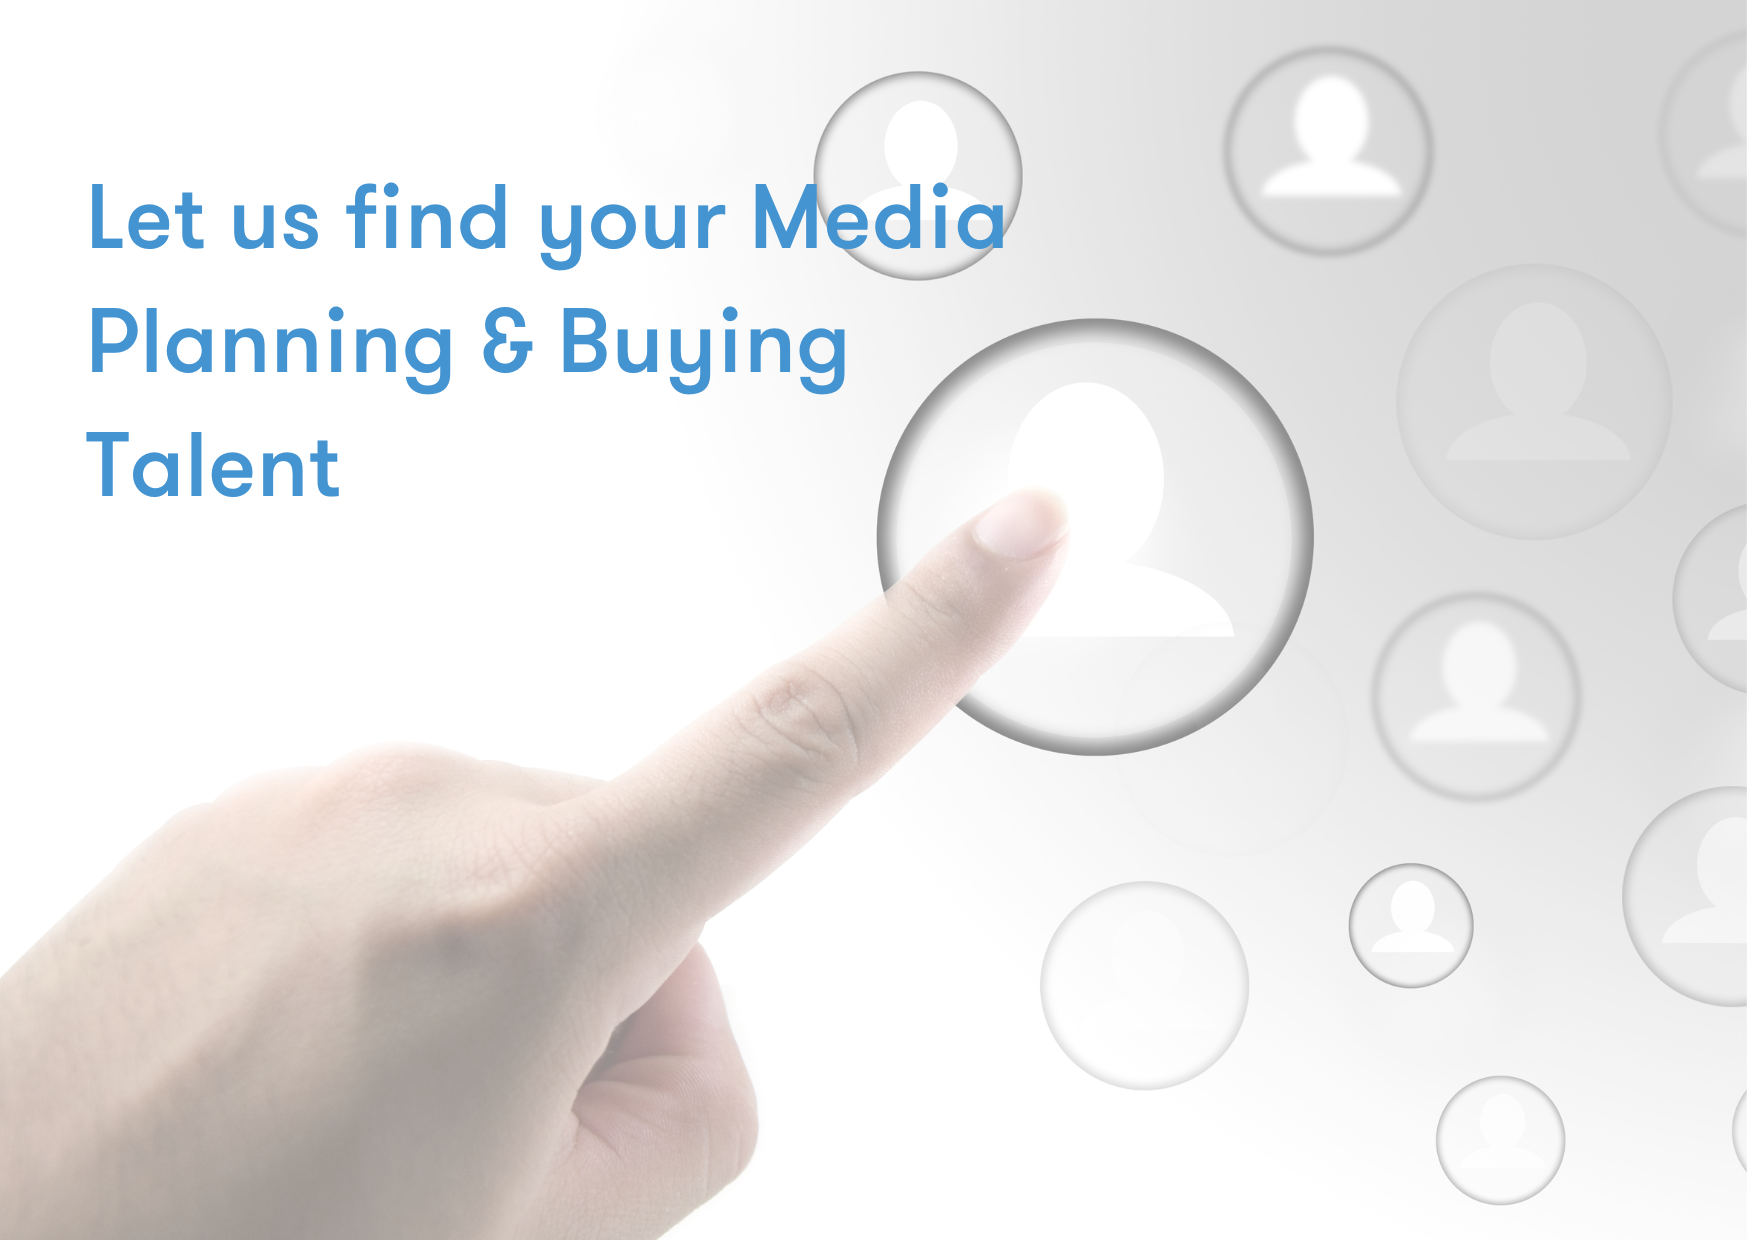 Hire Top Media Planning & Buying Talent in the UK - Let Us Find Your Perfect Fit